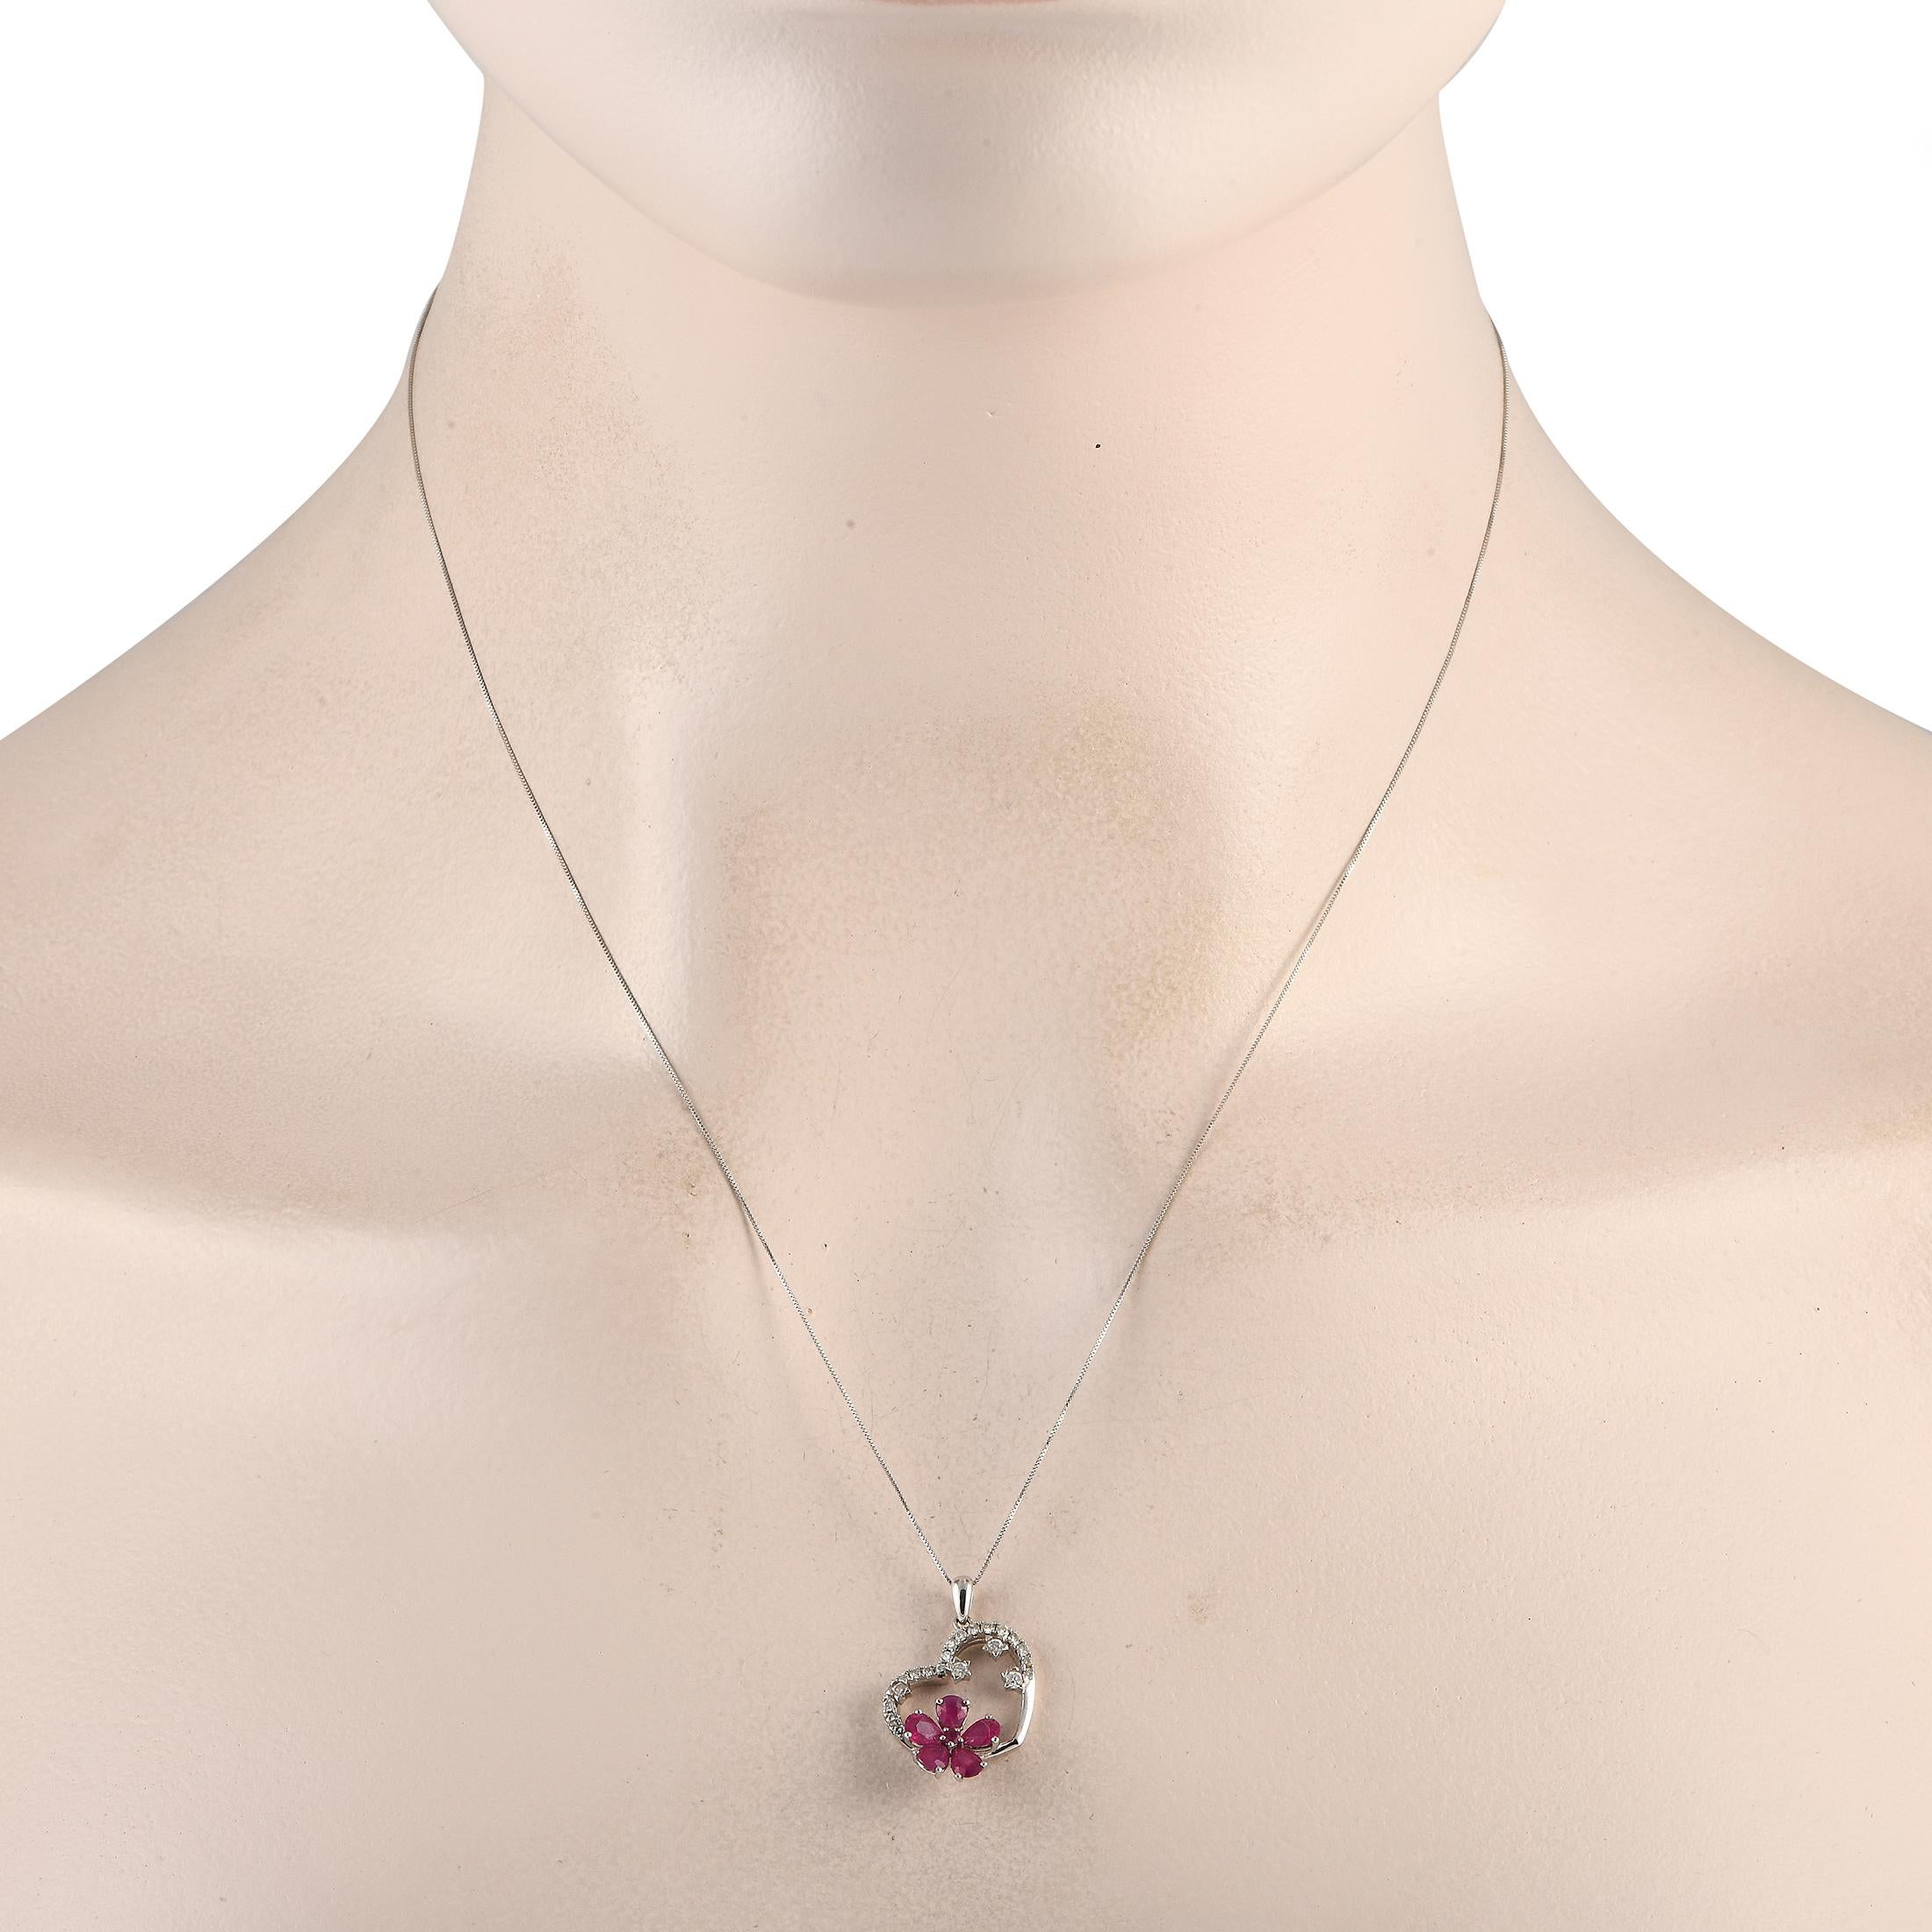 A heart-shaped pendant measuring 0.85 long by 0.65 wide makes this 14K White Gold necklace instantly captivating. Sweet and sophisticated, it comes complete with Ruby gemstones in a floral motif, sparkling Diamonds totaling 0.20 carats, and a sleek